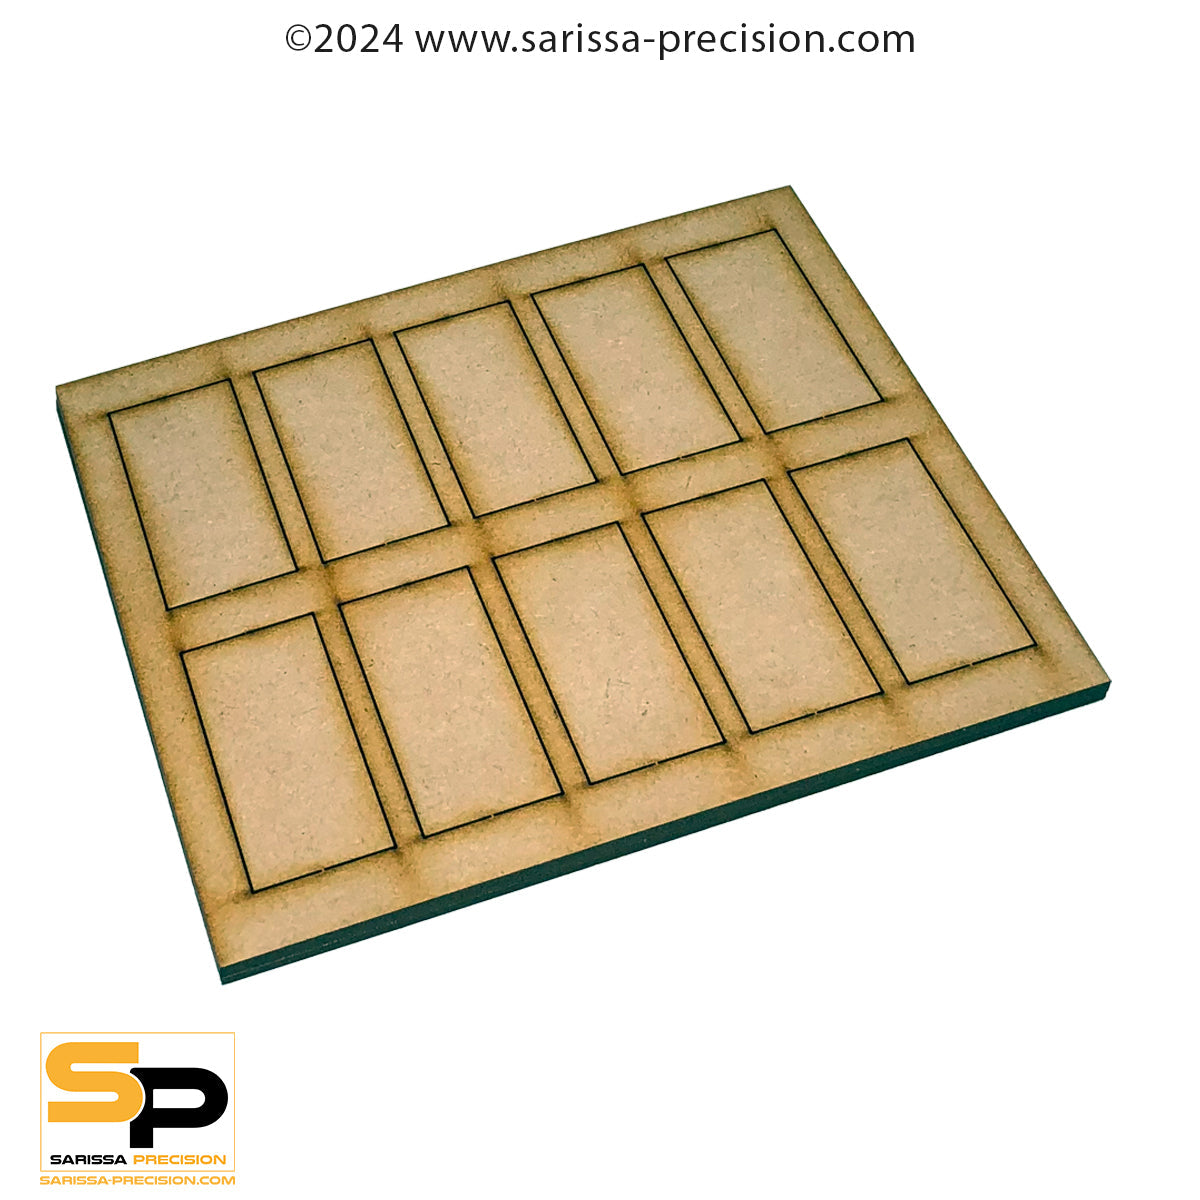 4 x 3 30x60mm Cavalry Conversion Tray for 25x50mm Bases